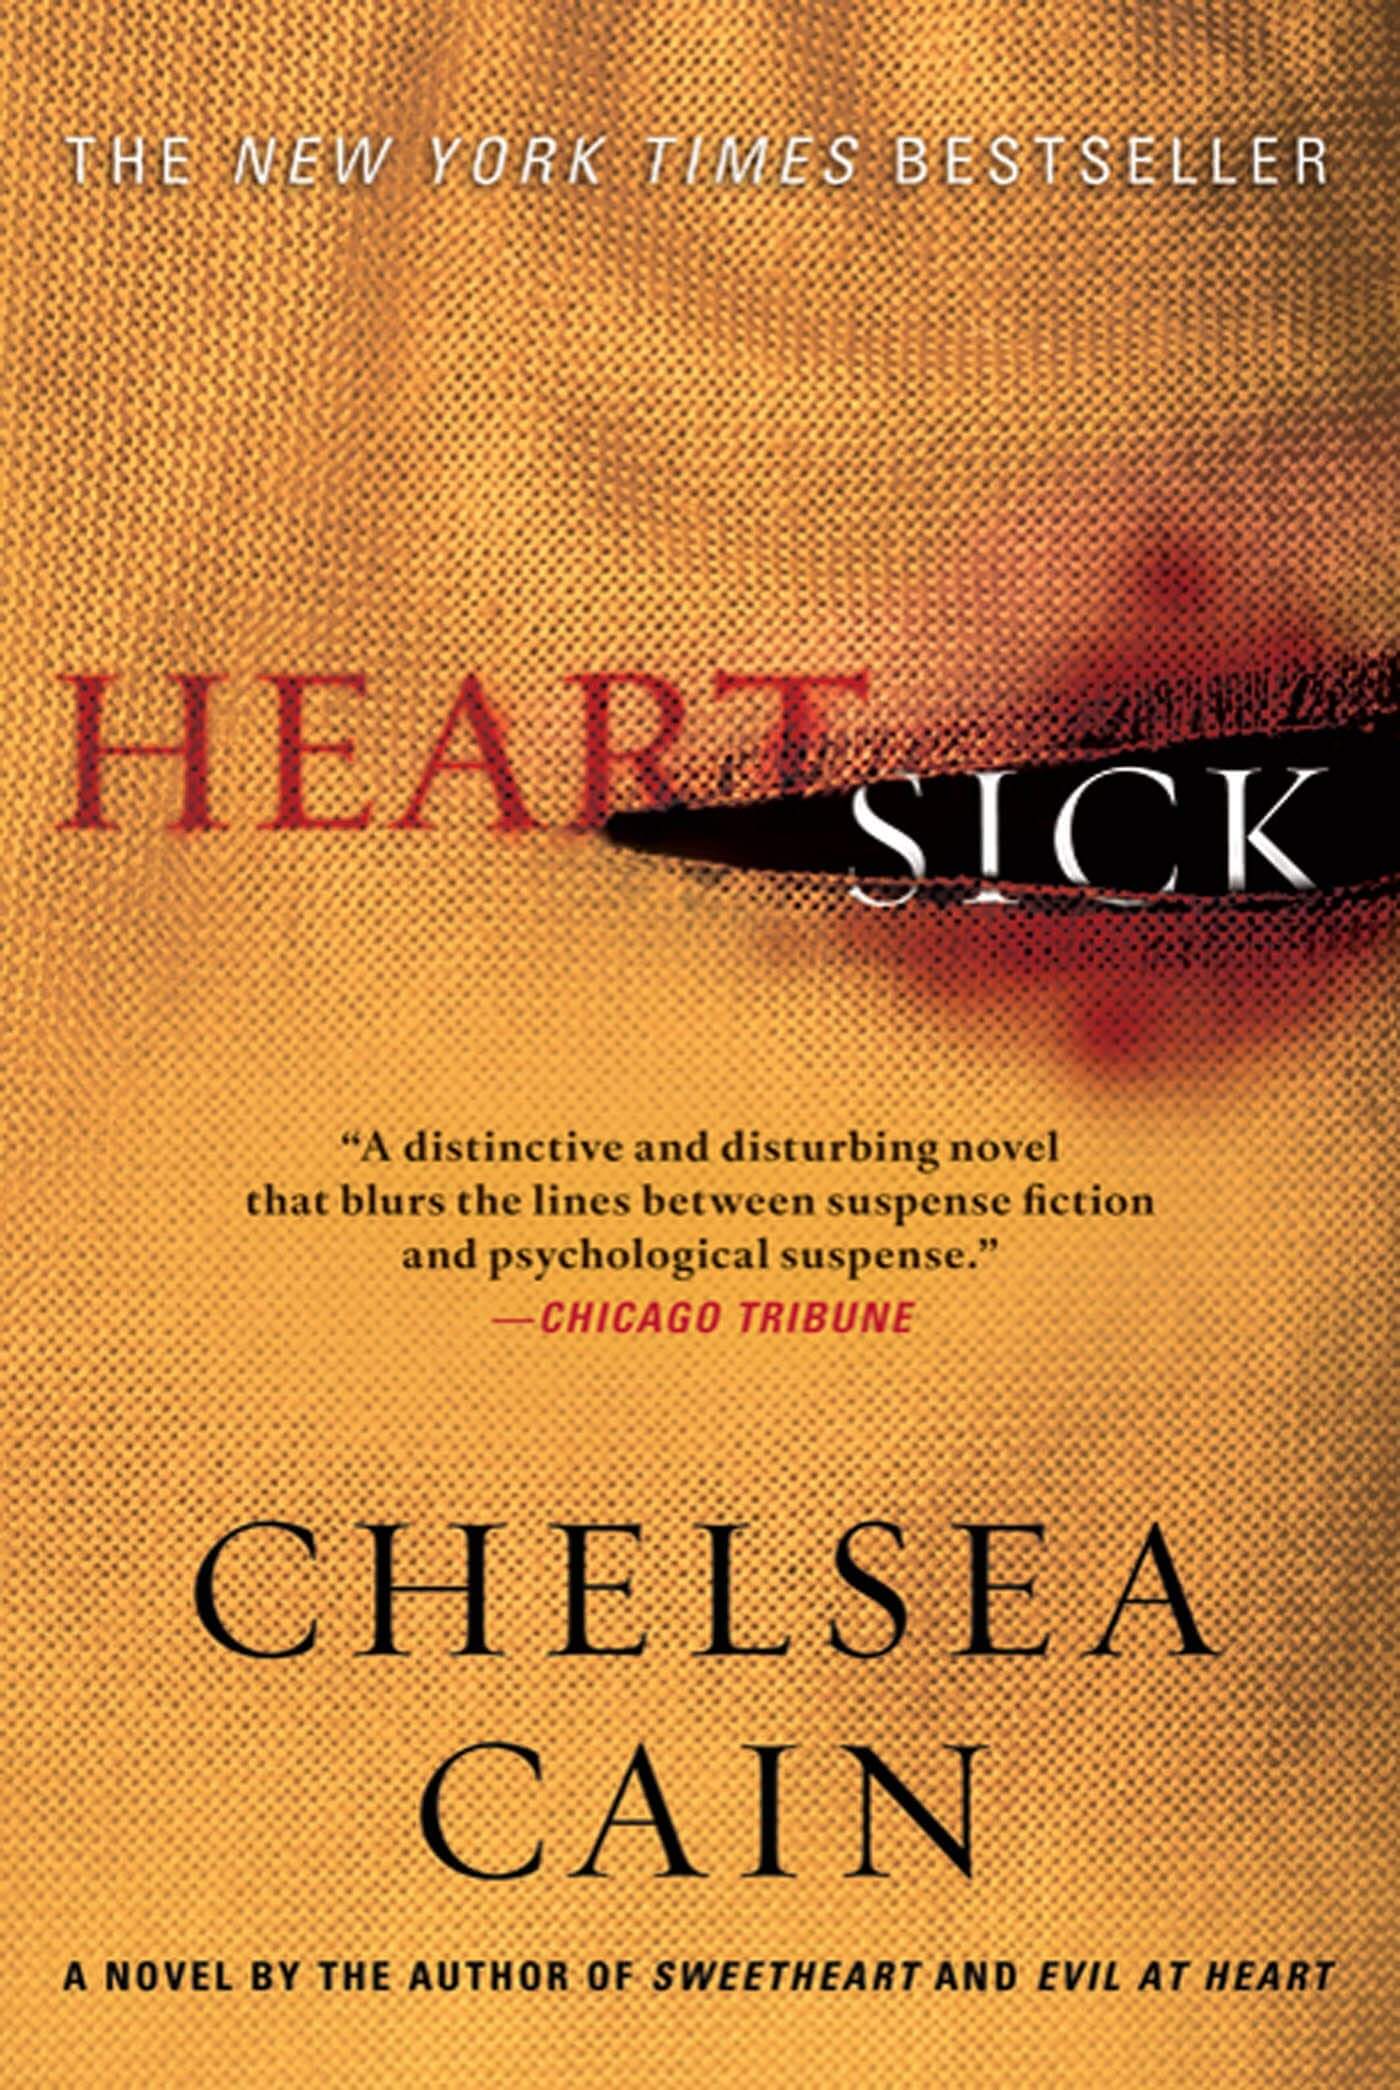 Cover of Heartsick by Chelsea Cain